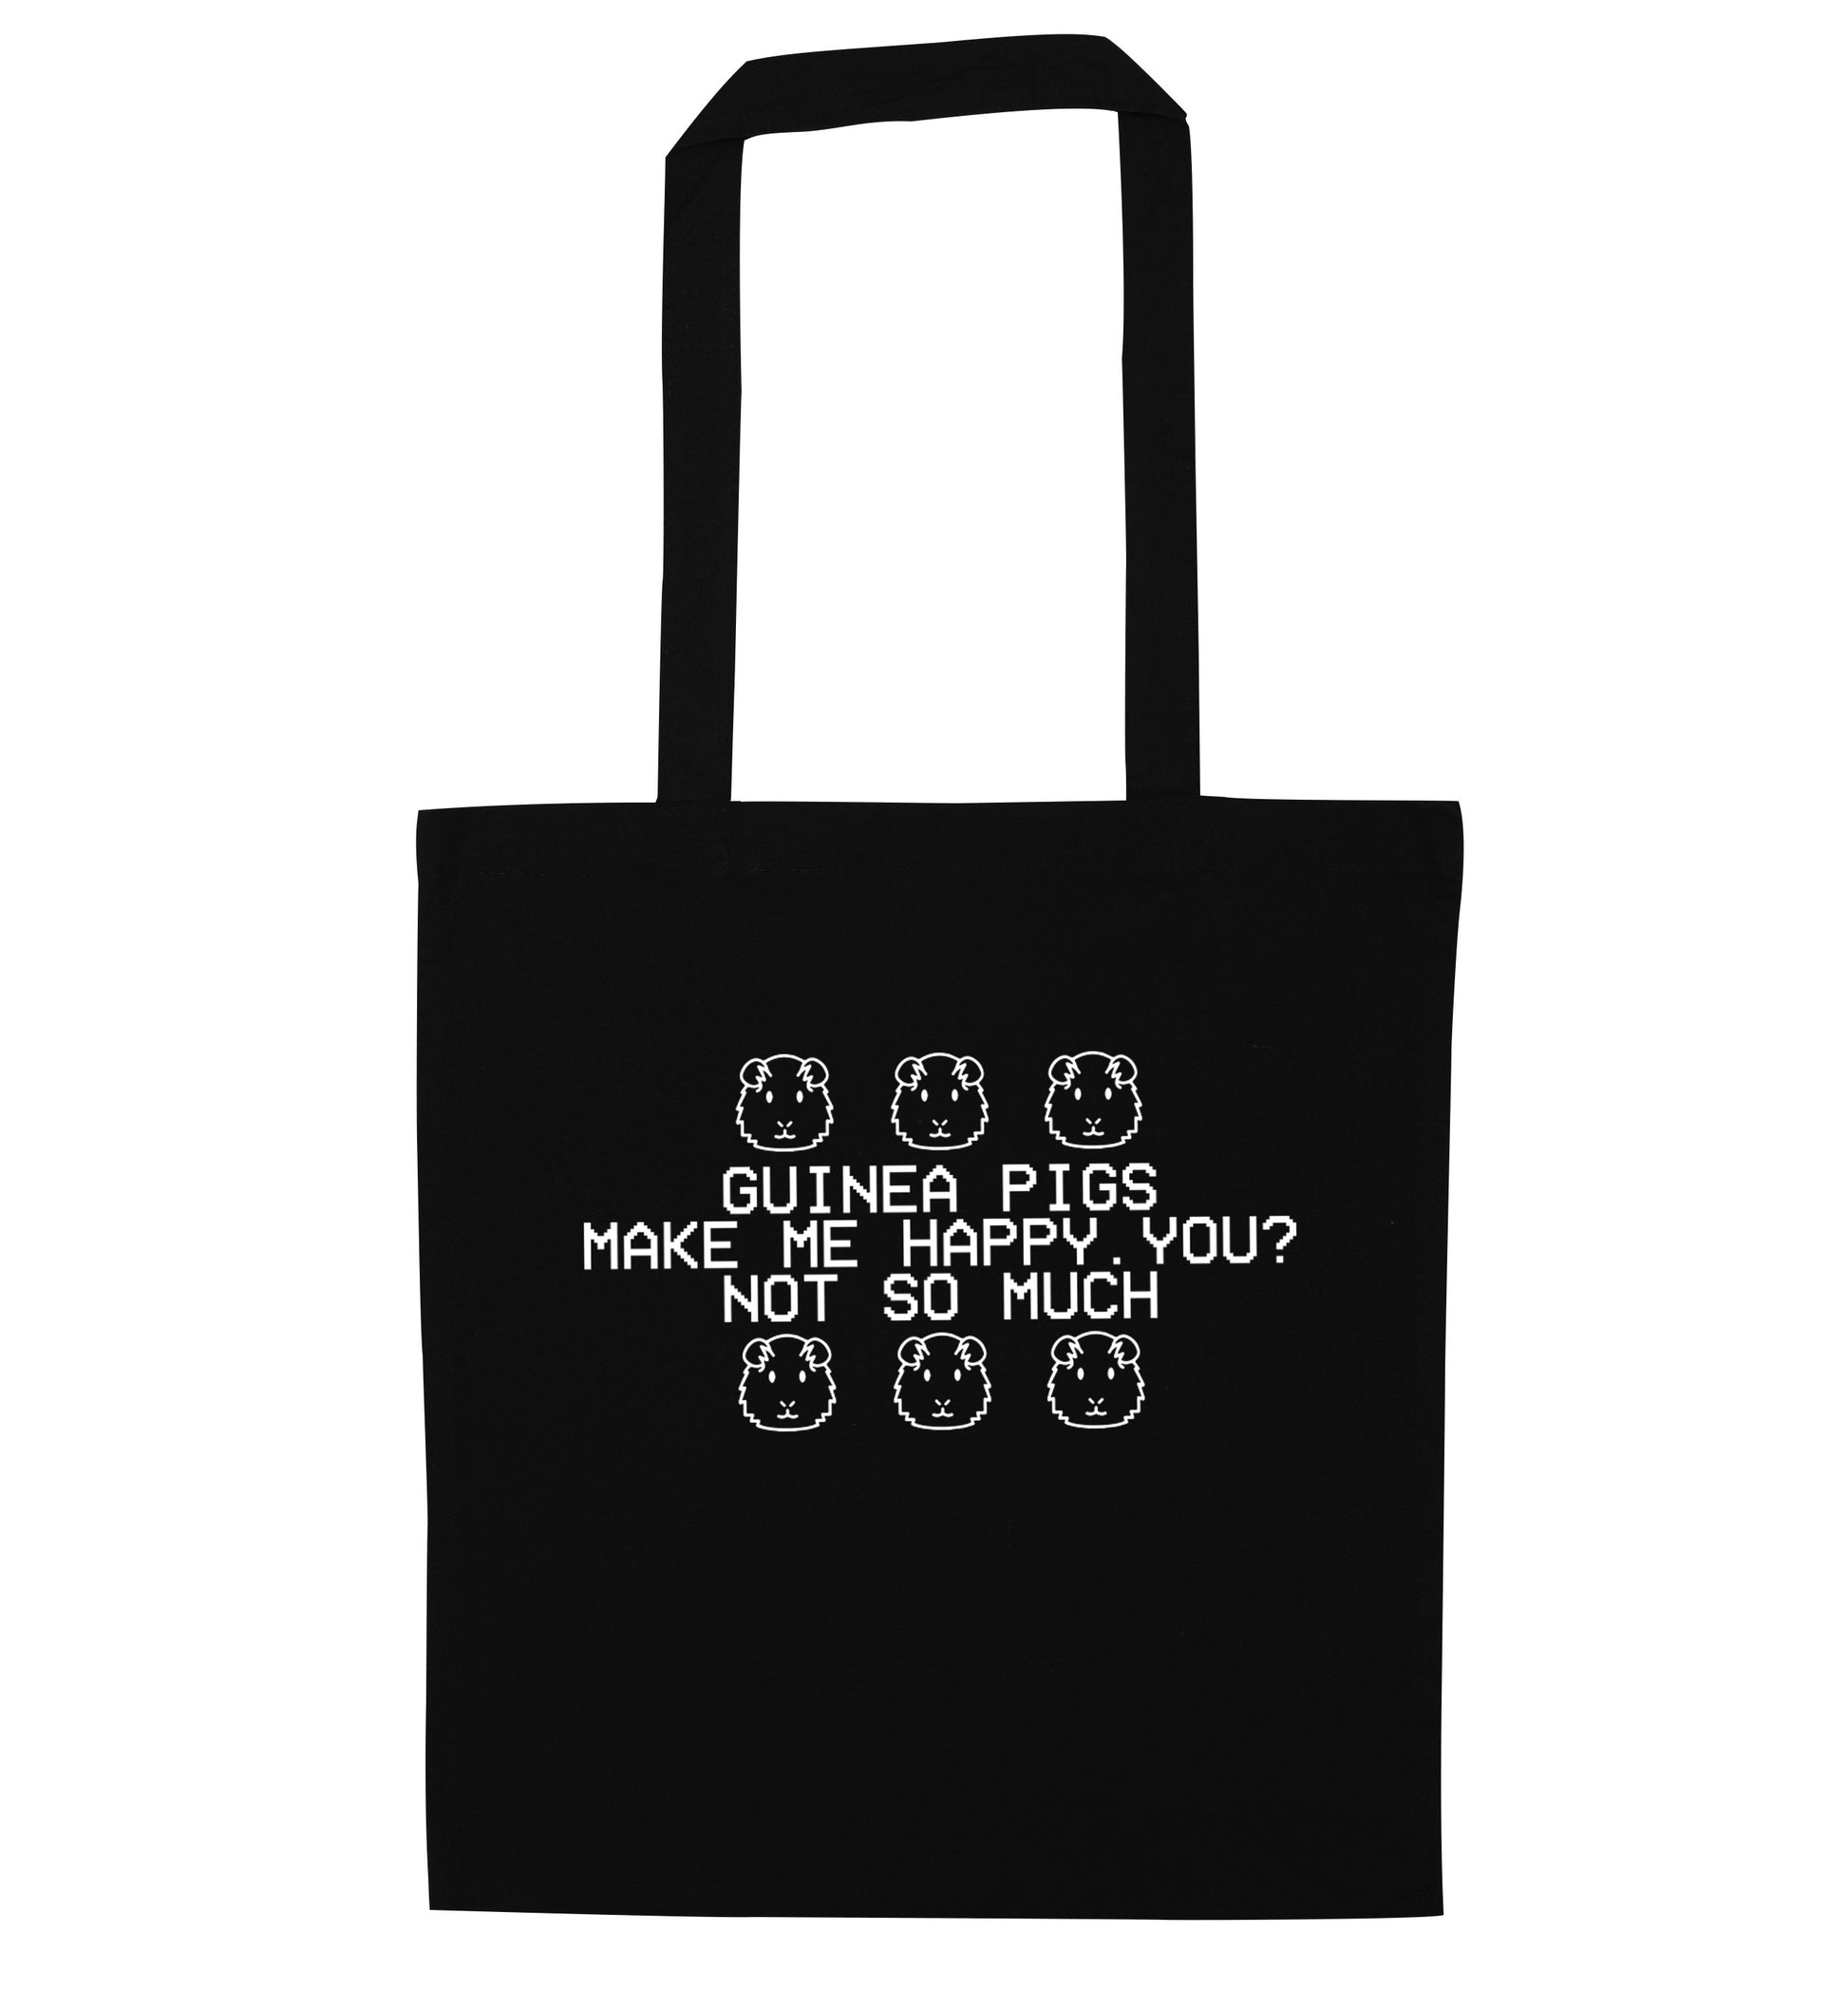 Guinea pigs make me happy, you not so much black tote bag